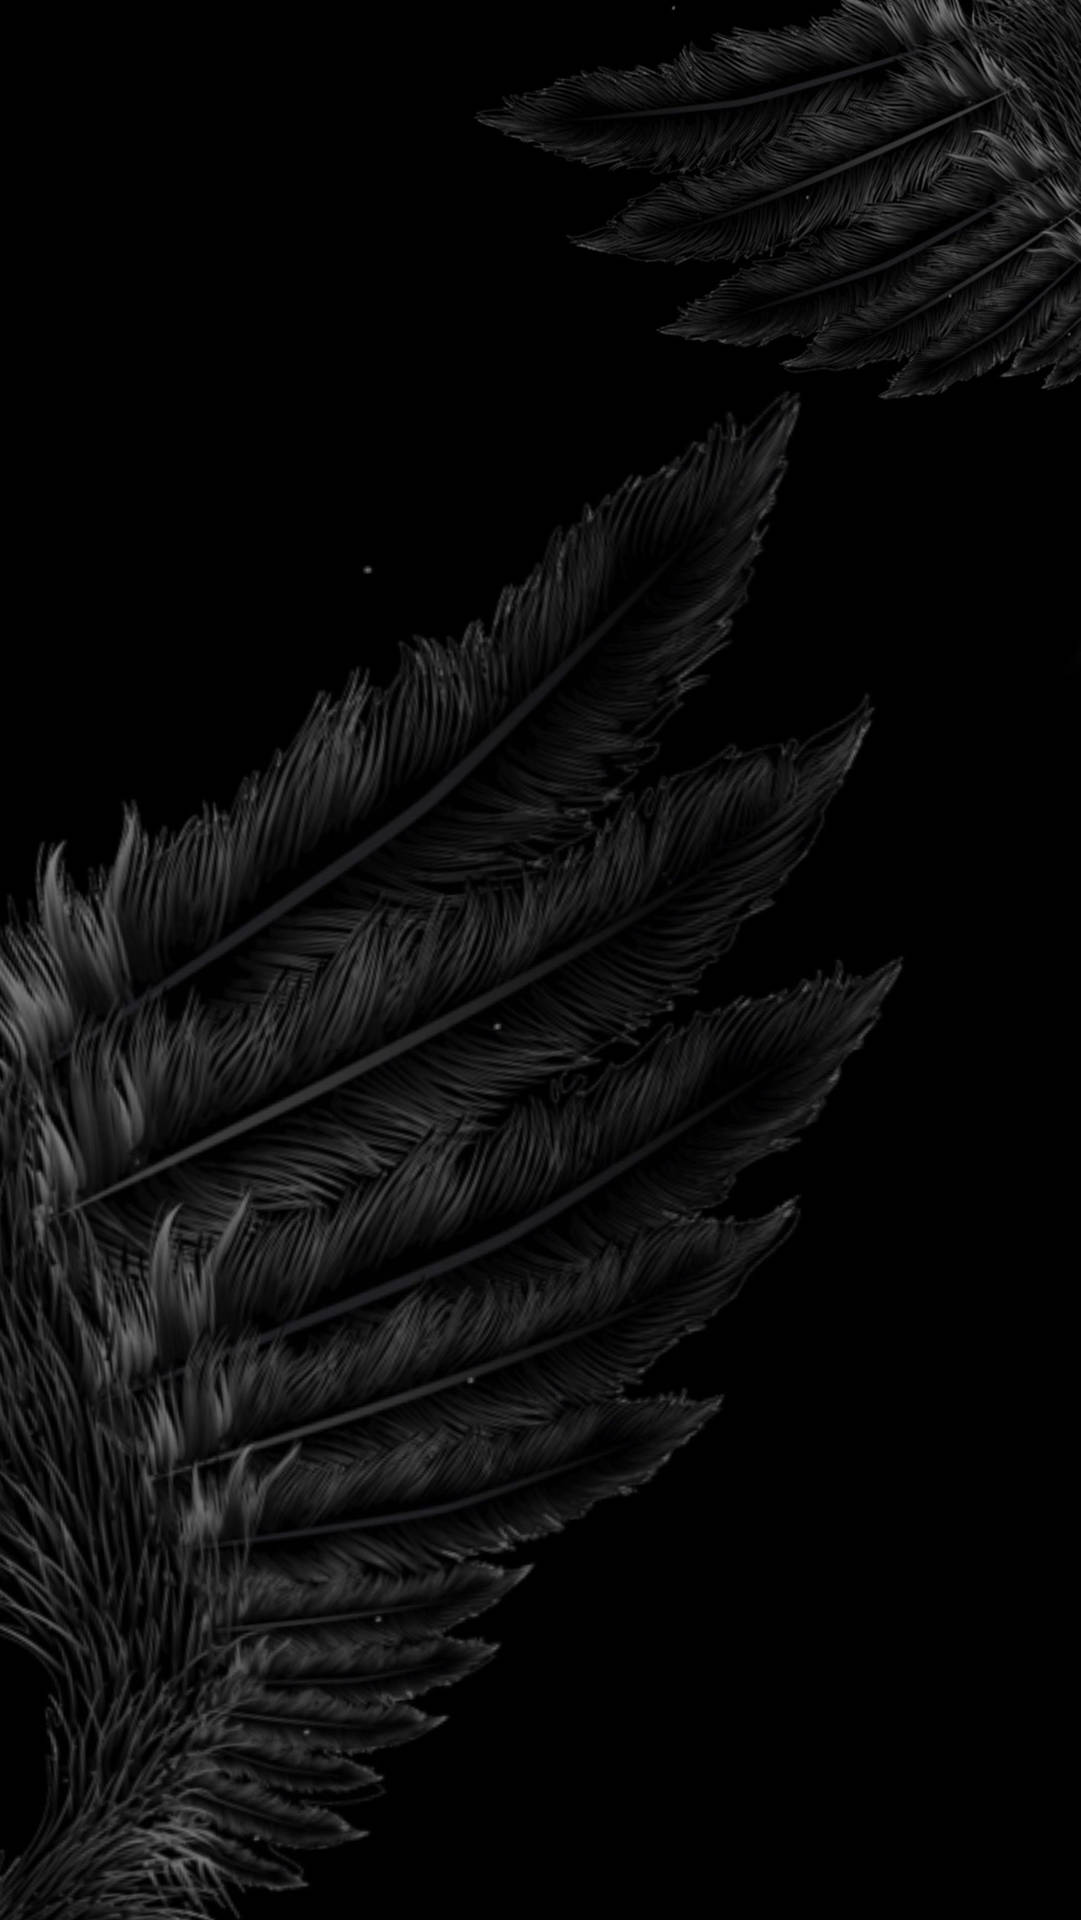 A close-up of black feathers against a black background - Wings